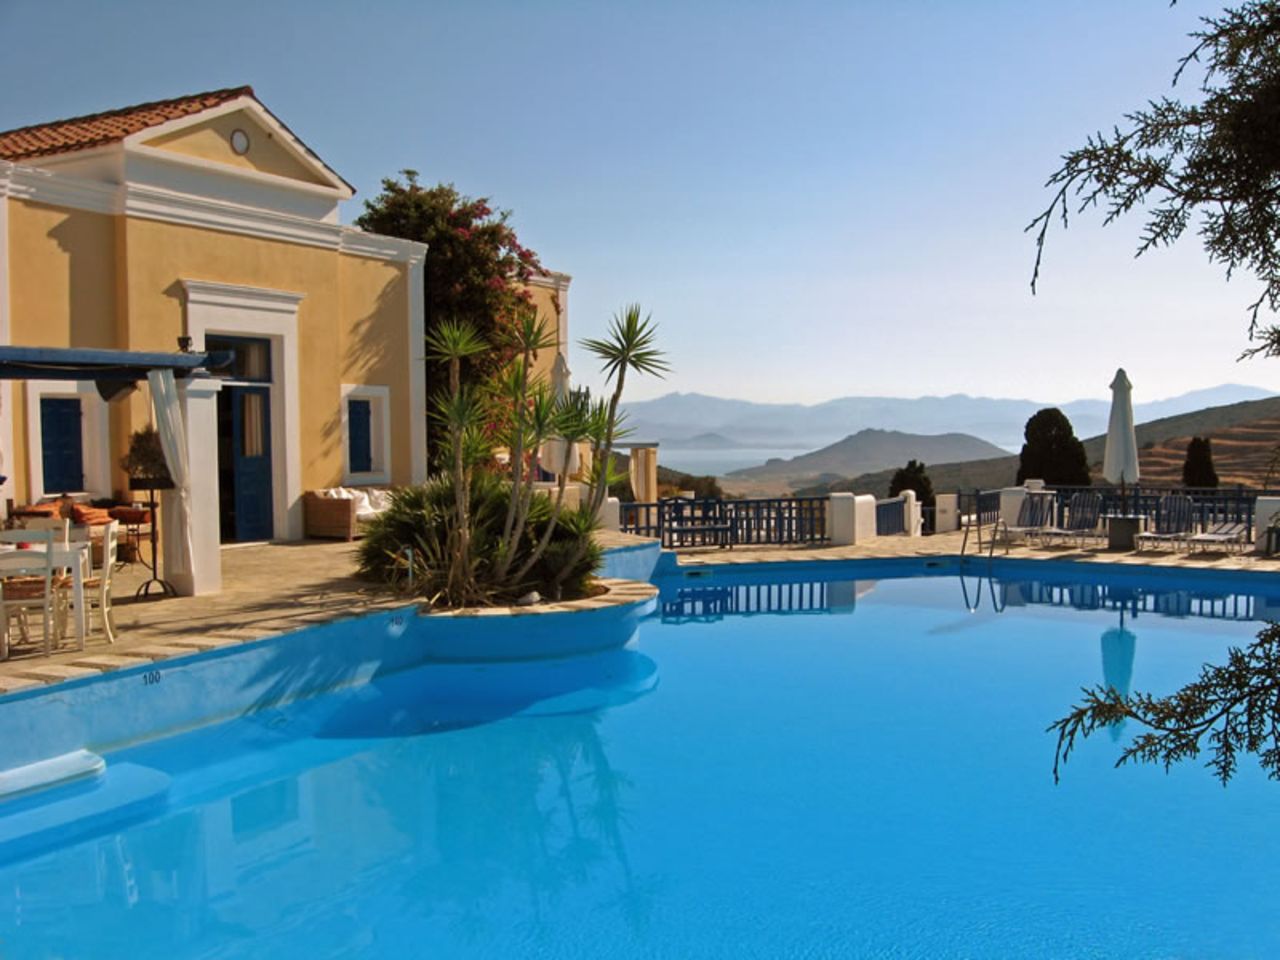 Lefkes Village Hotel in Paros delivers a Greek island vacation without the high prices of neighboring islands. 